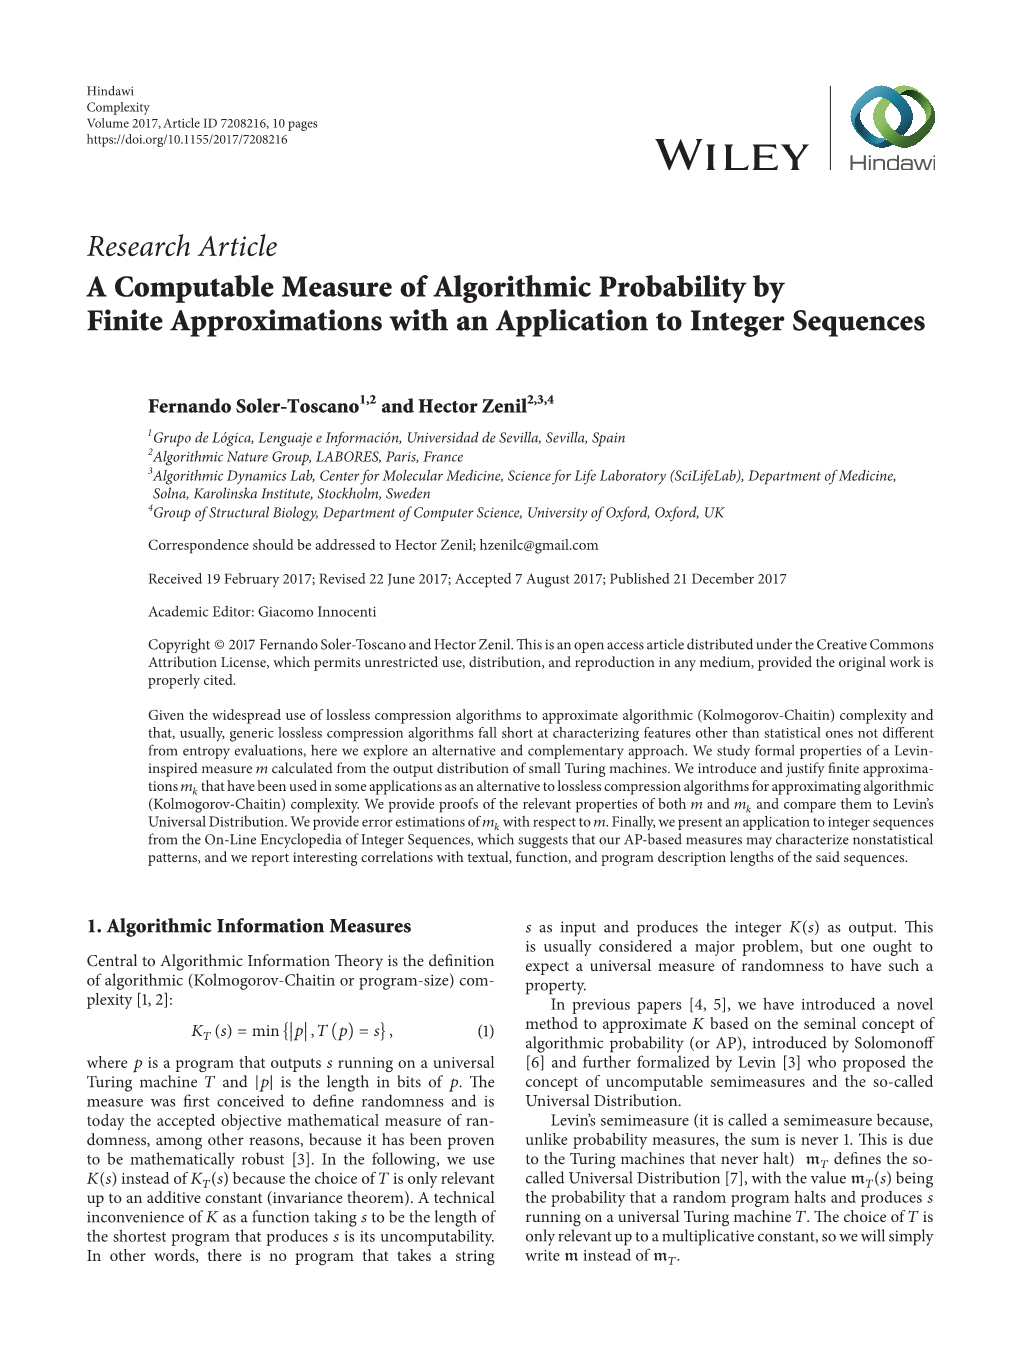 A Computable Measure of Algorithmic Probability by Finite Approximations with an Application to Integer Sequences